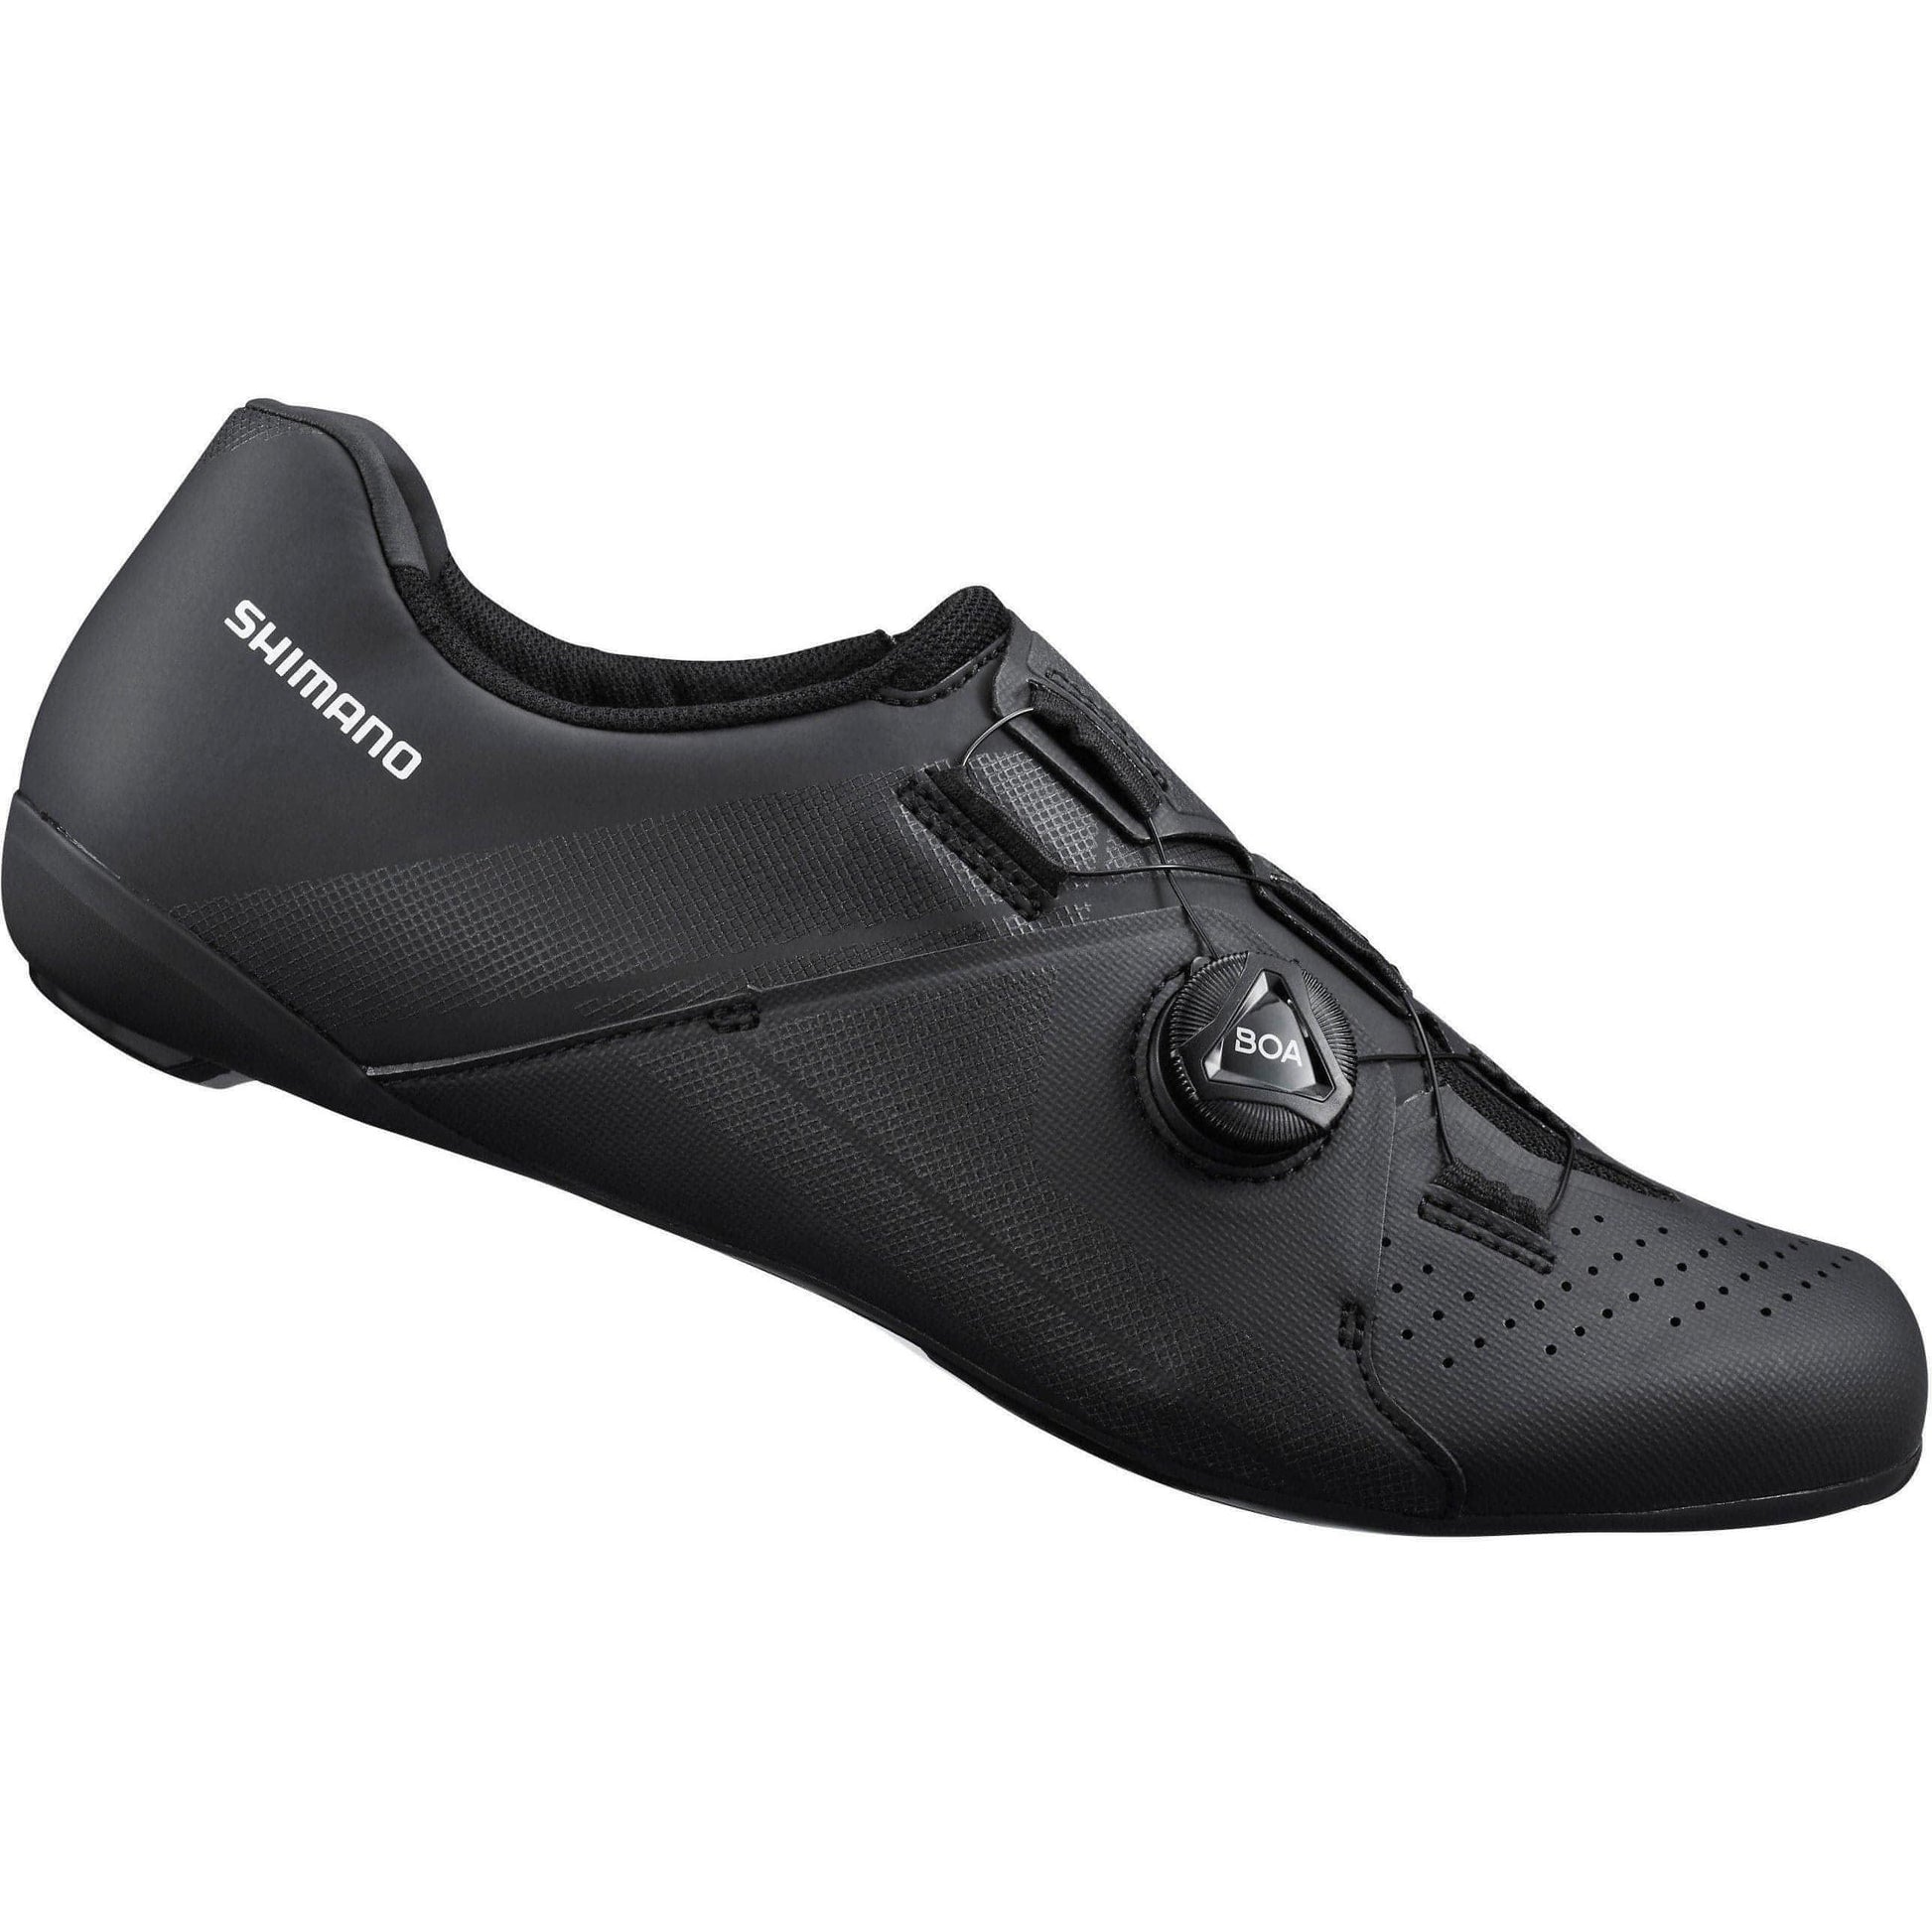 Shimano RC300 Road Cycling Shoes - Black - Start Fitness